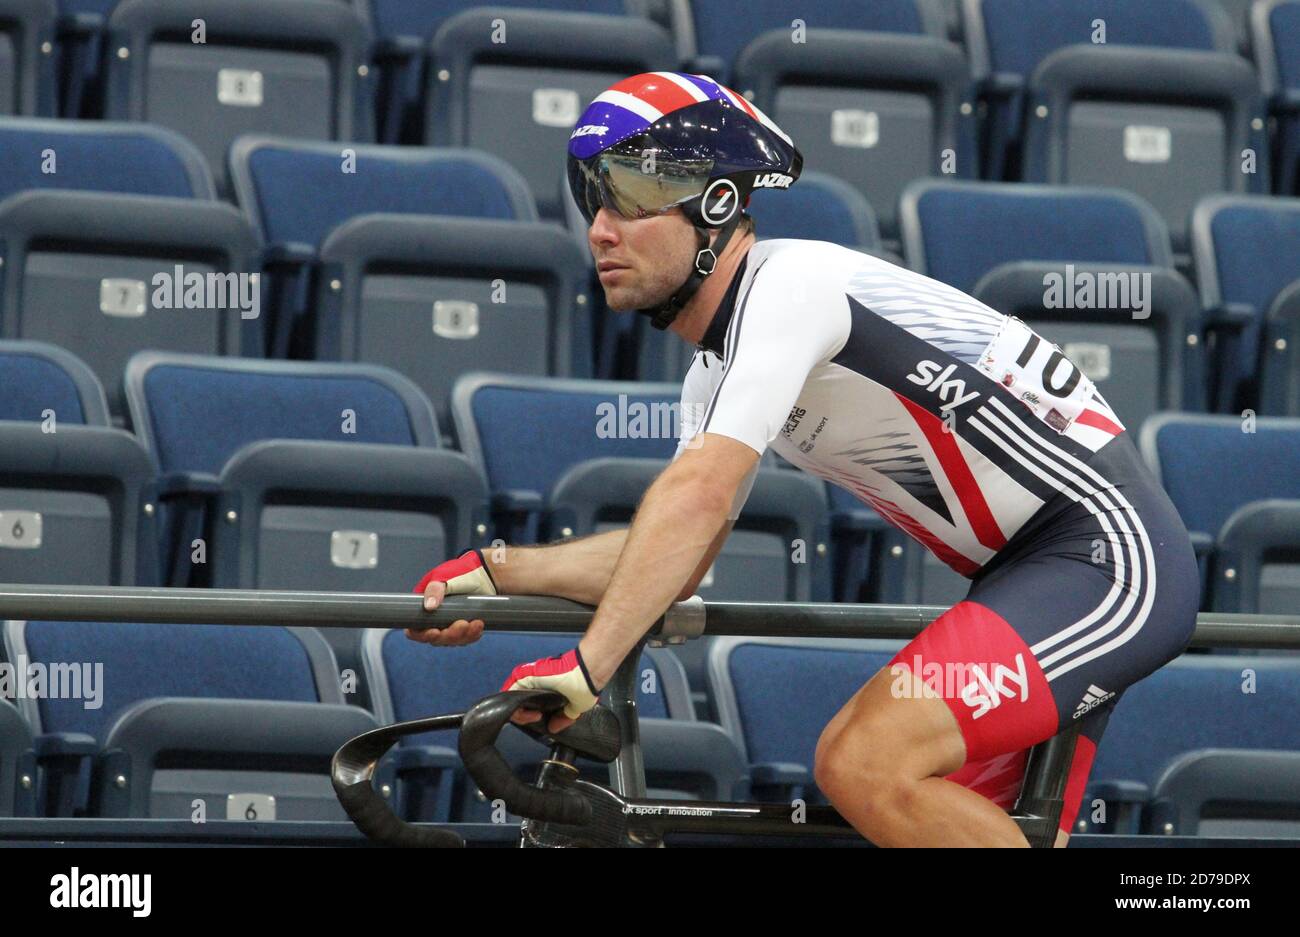 British cyclist Mark Cavendish during the International track cycling event “Panevėžys 2016“ in Lithuania. Stock Photo